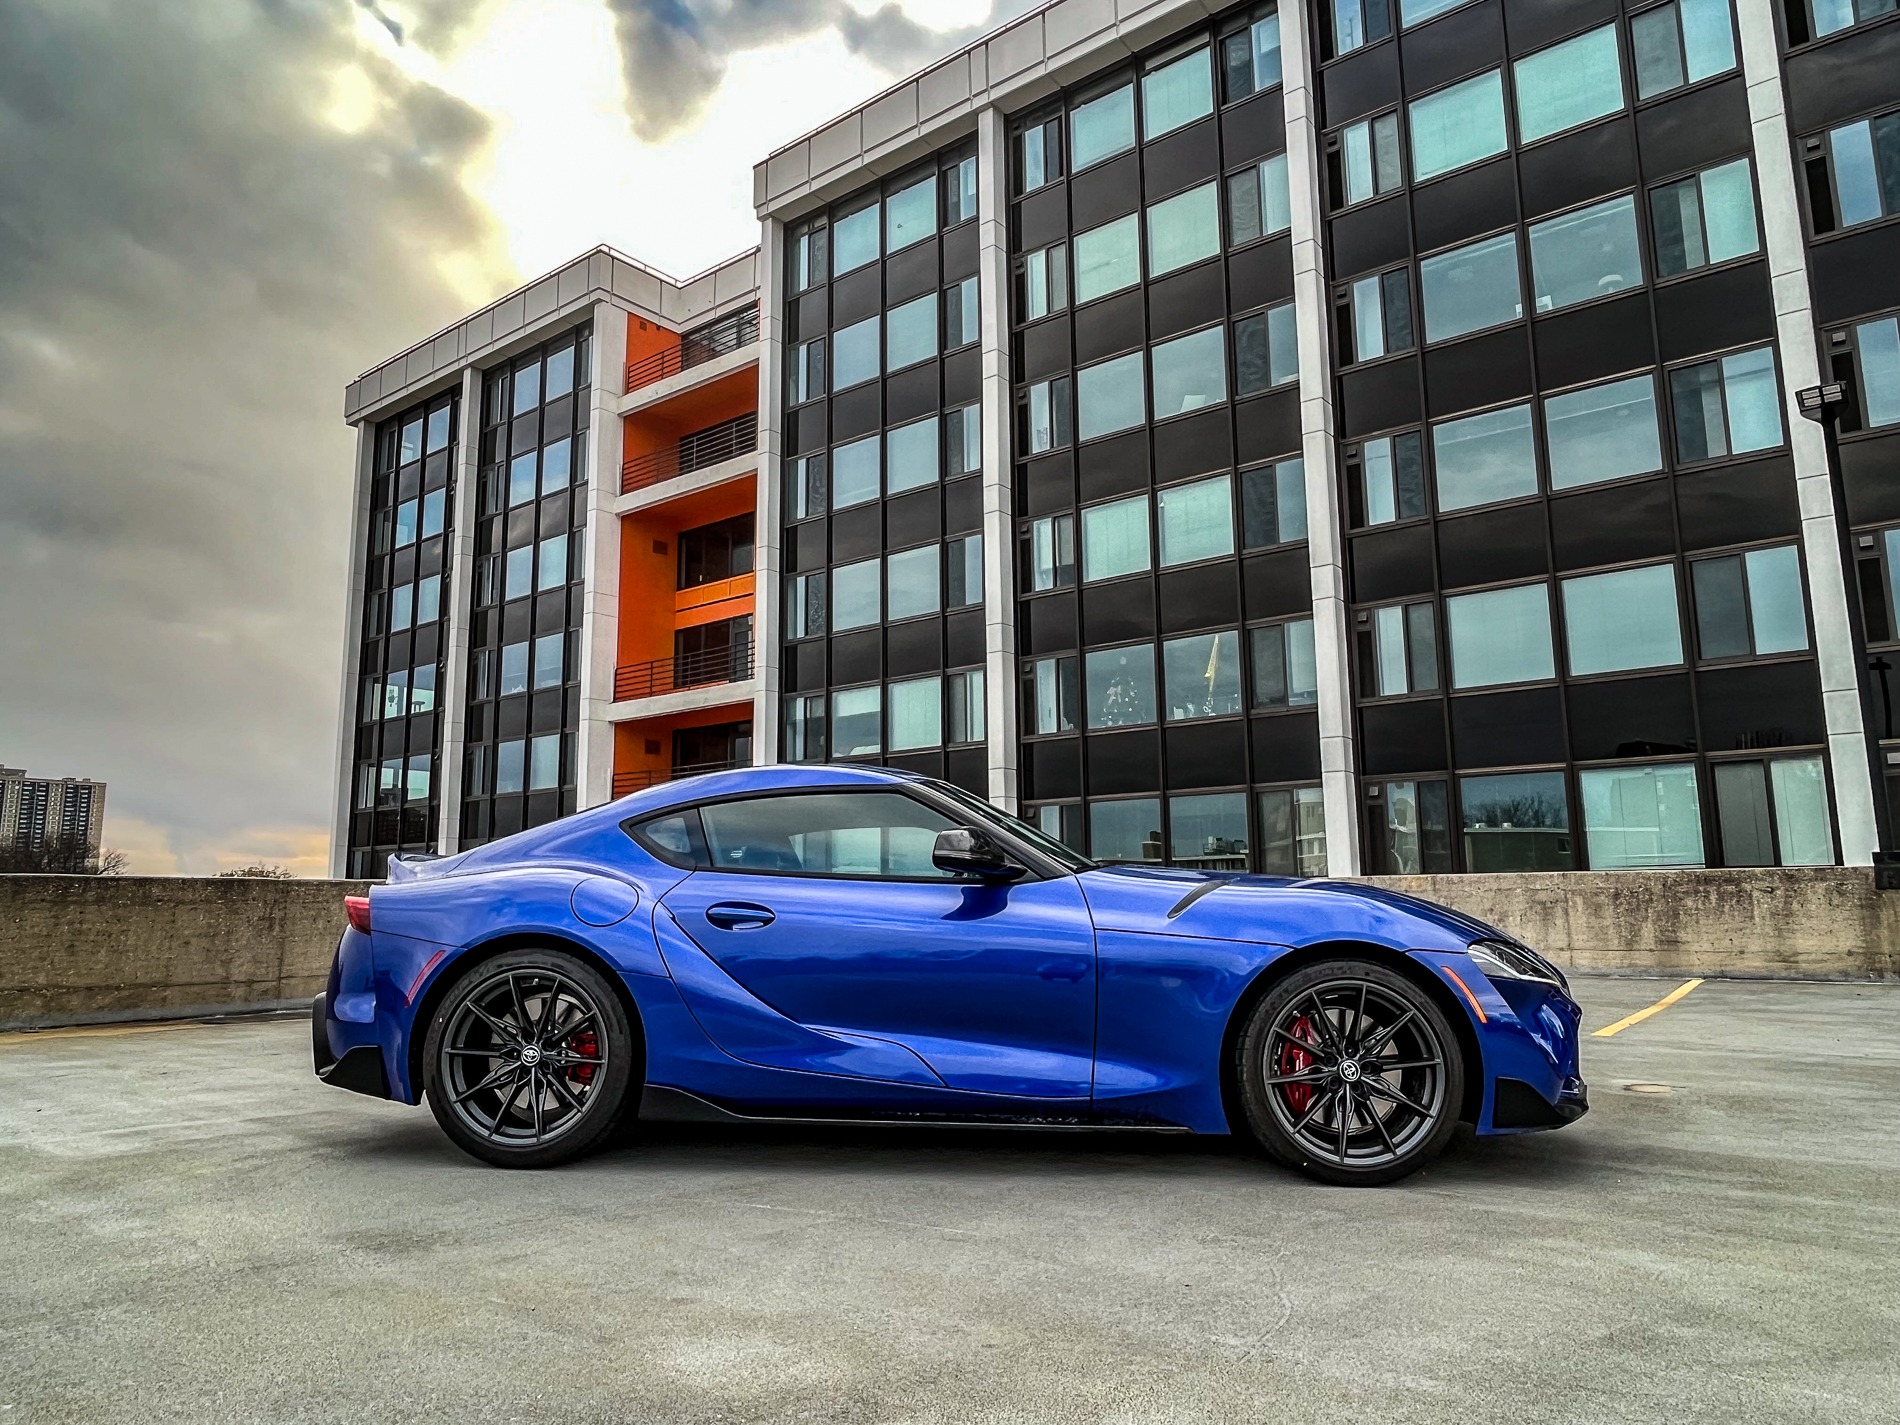 2023 Toyota GR Supra: Everything You Need to Know